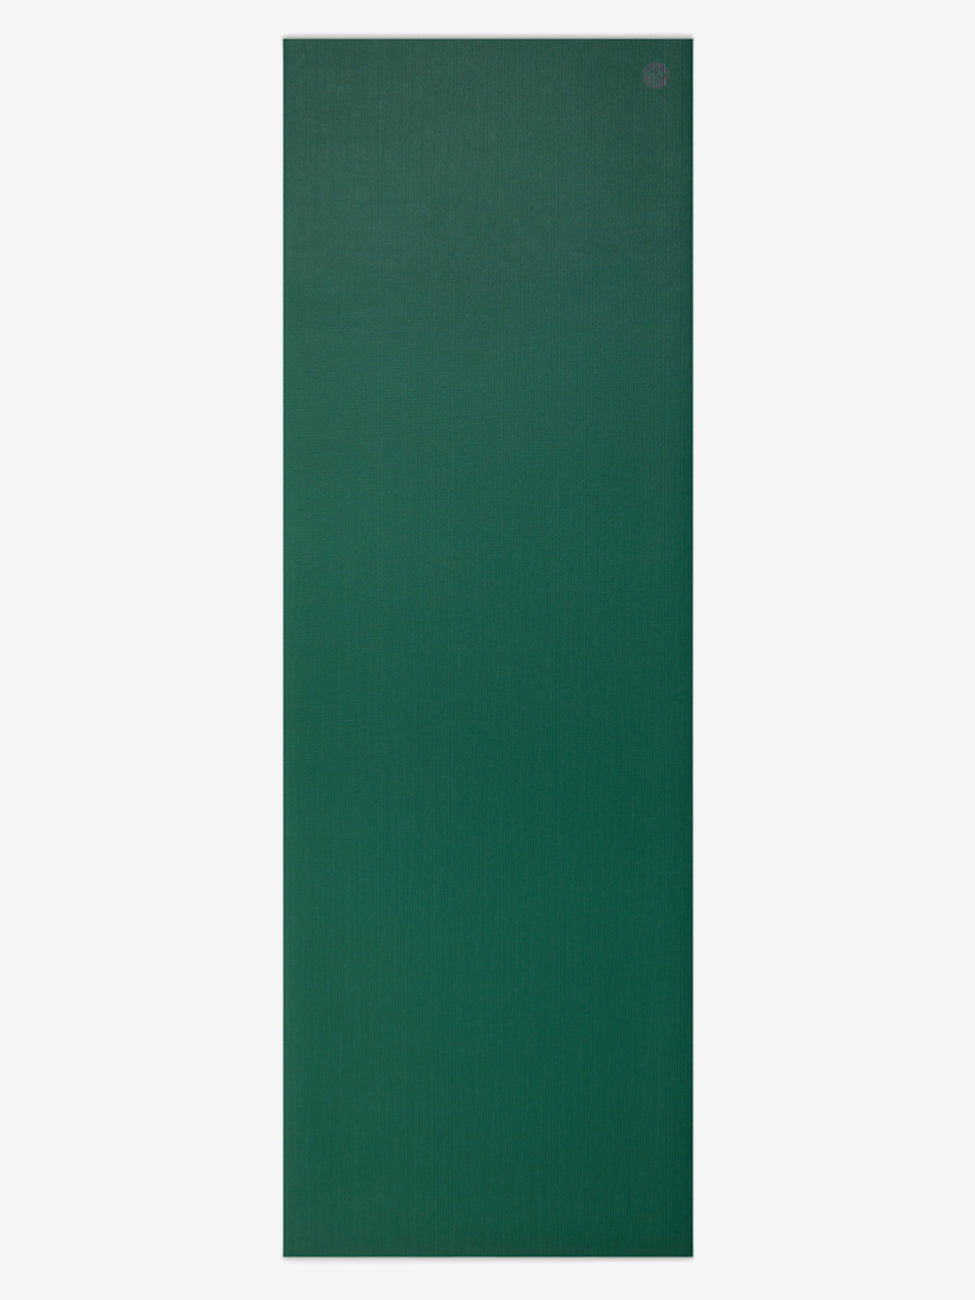 Green textured yoga mat with a visible logo in the top-right corner, full-length front view, non-slip professional yoga equipment.